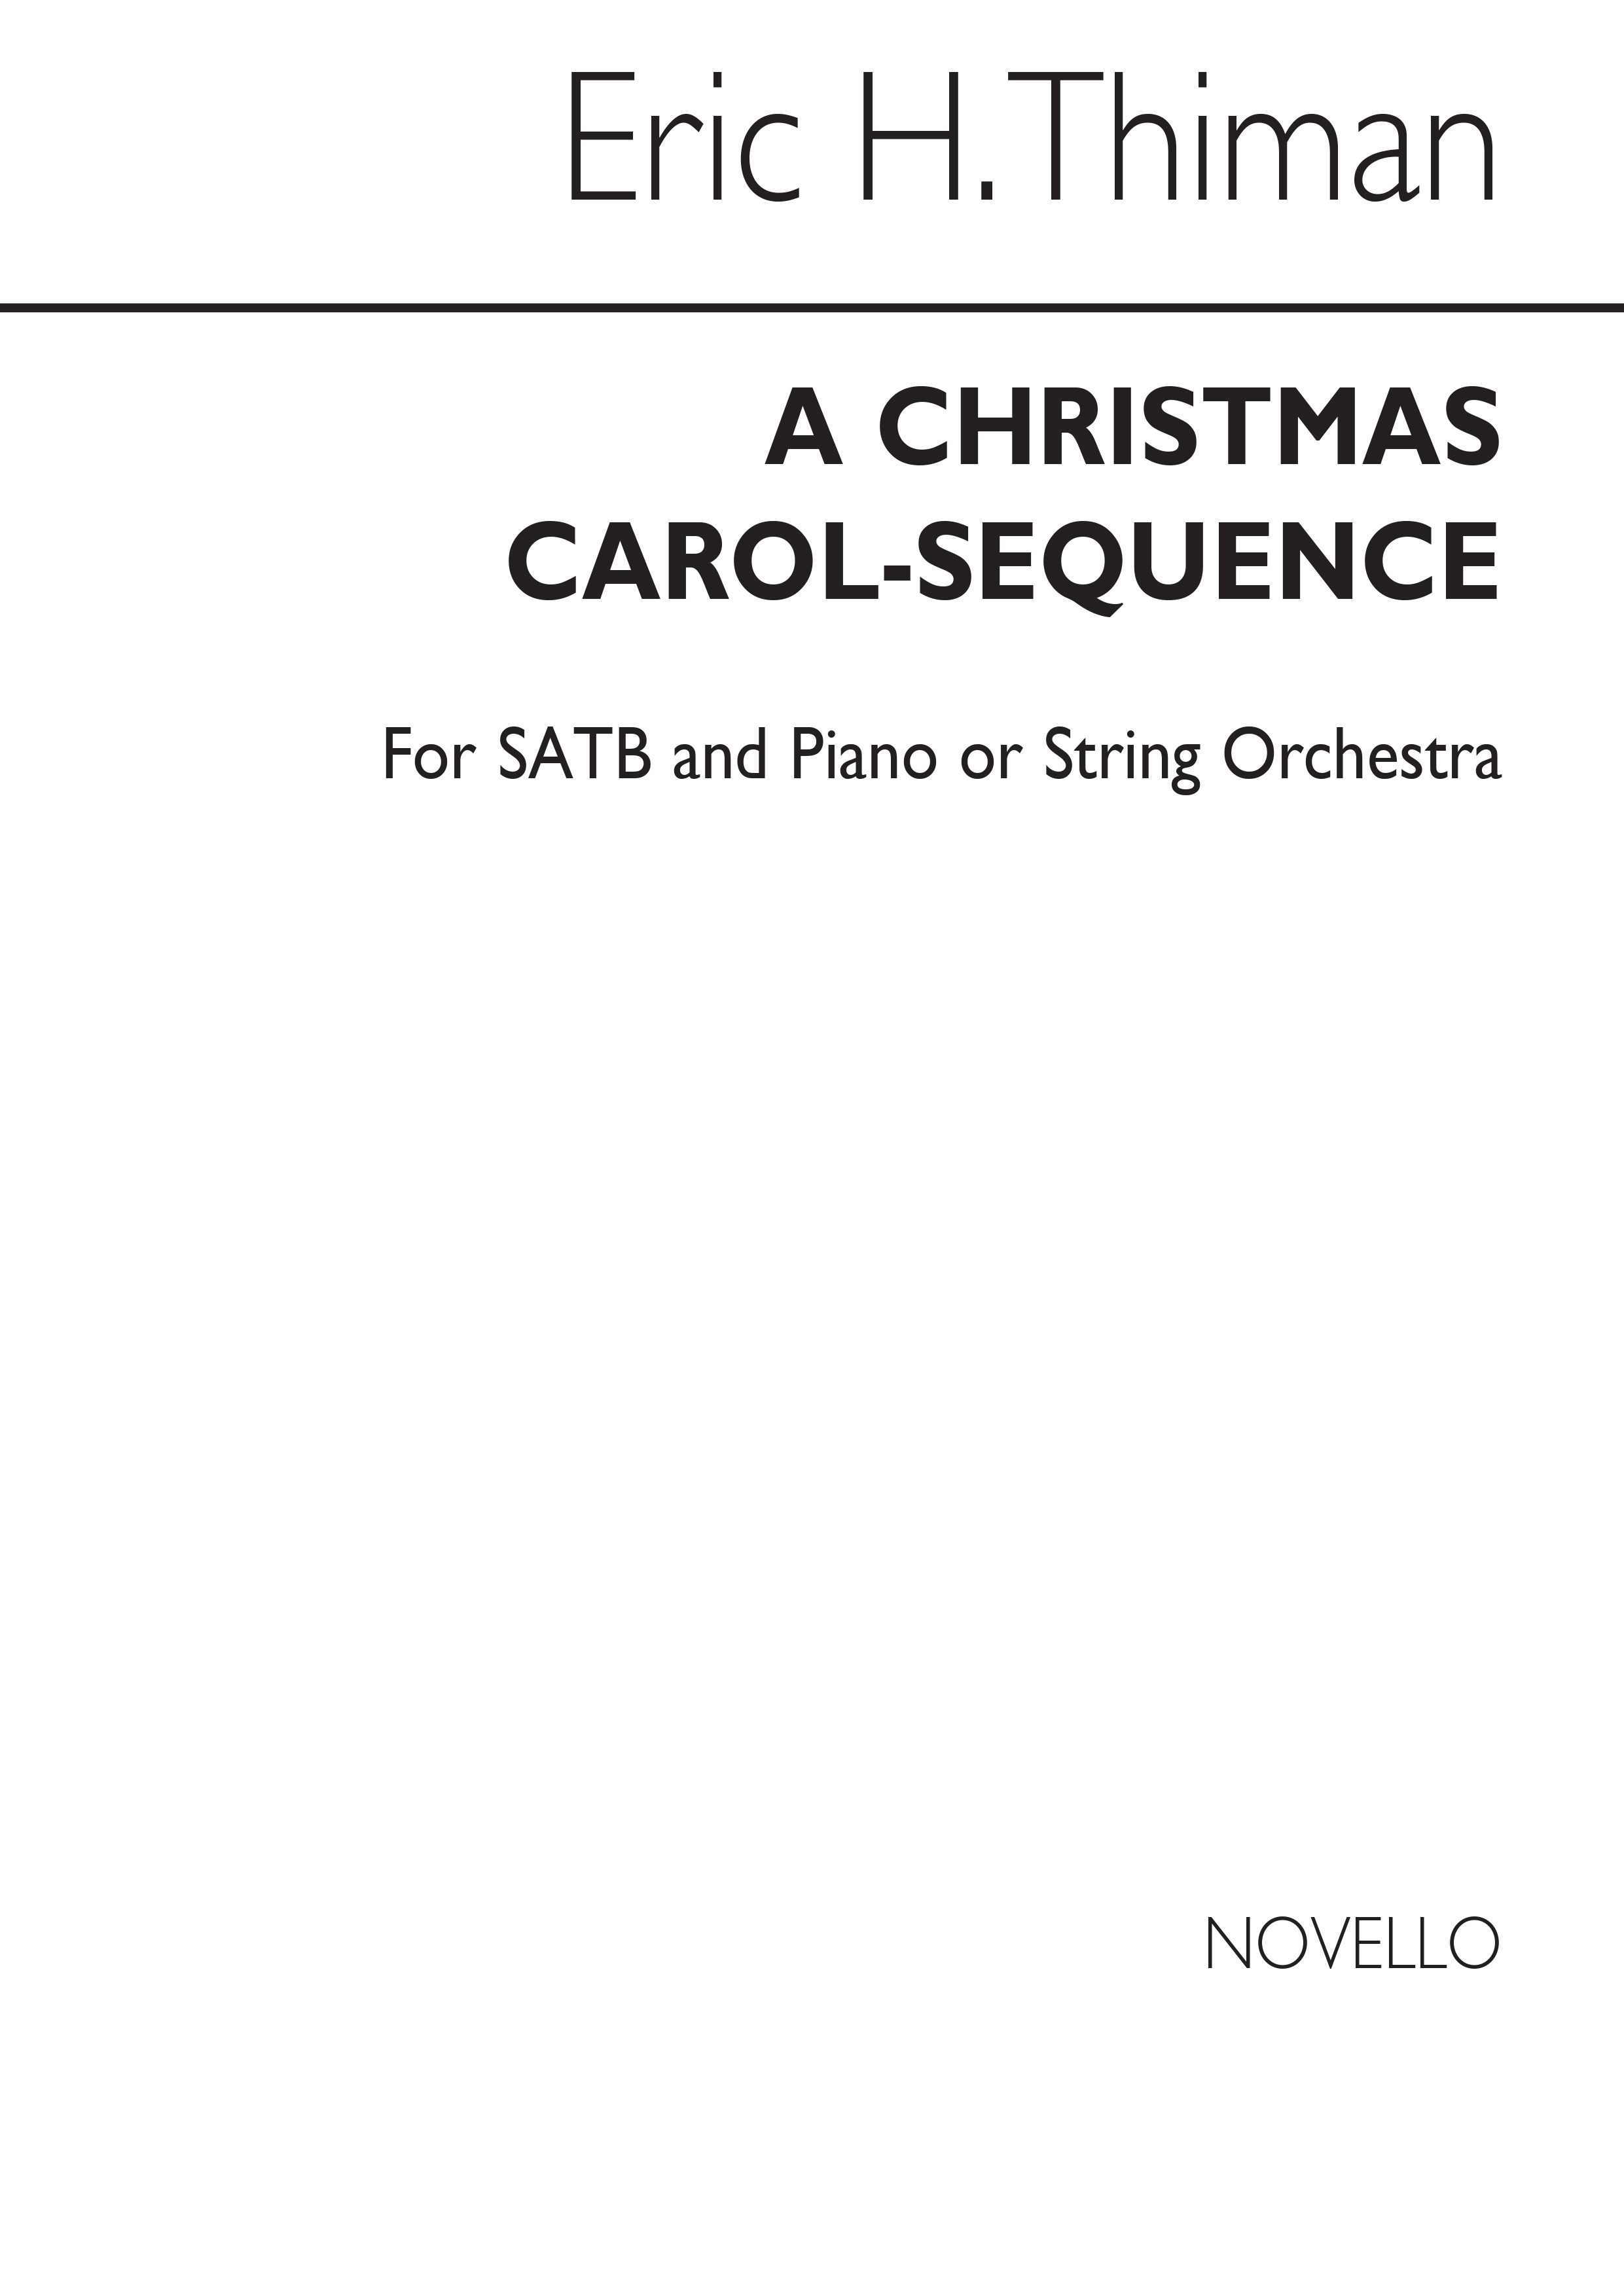 Thiman: A Christmas Carol Sequence for SATB Chorus with Piano acc.